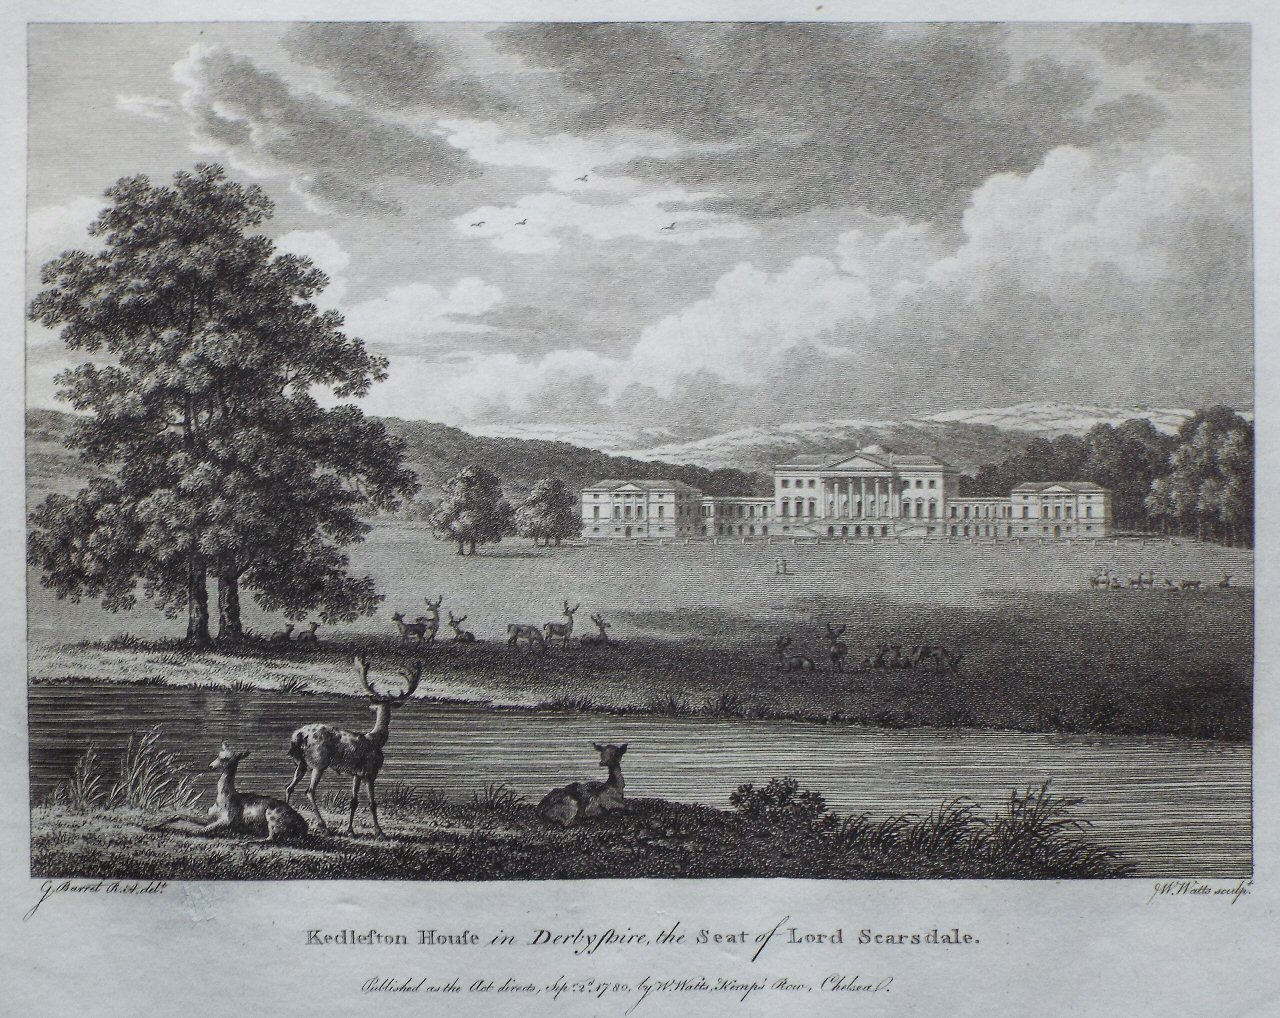 Print - Kedlestone House in Derbyshire, the Seat of Lord Scarsdale. - Watts